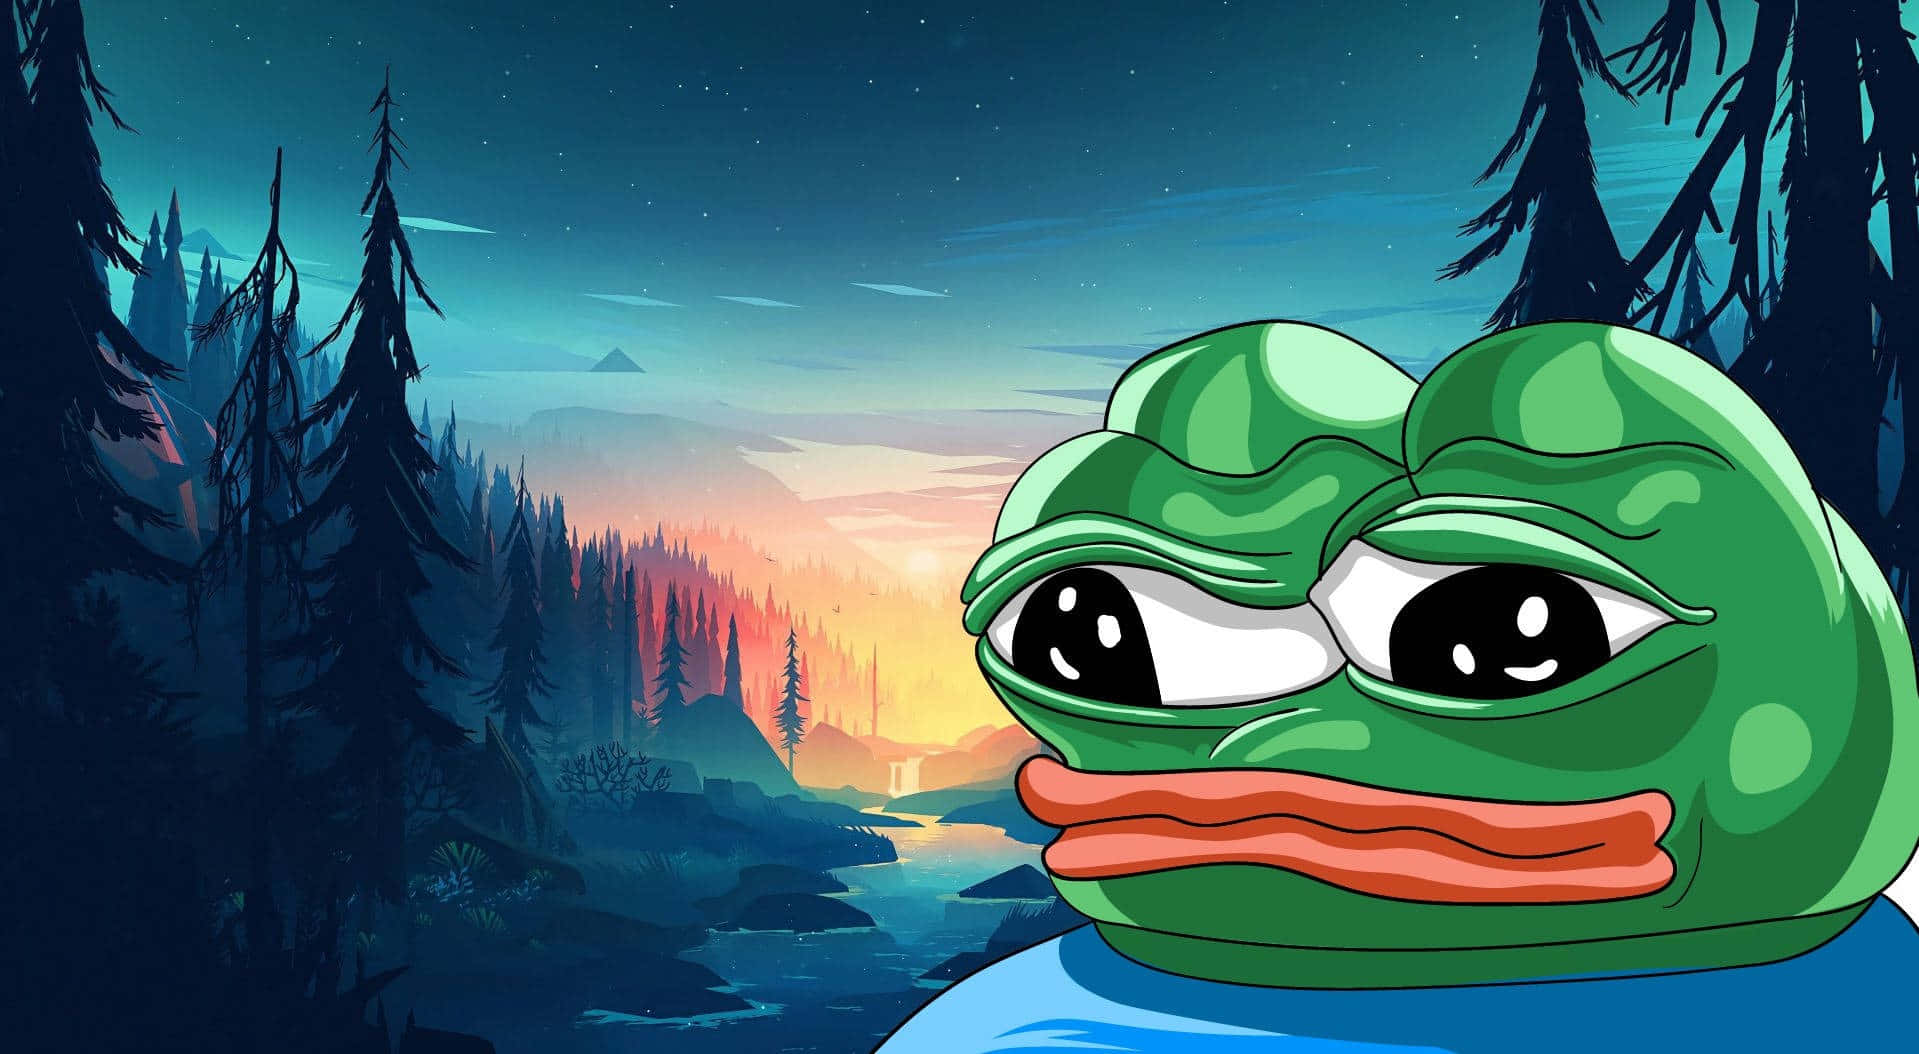 Free Pepe The Frog Wallpaper Downloads, [100+] Pepe The Frog Wallpapers for  FREE 